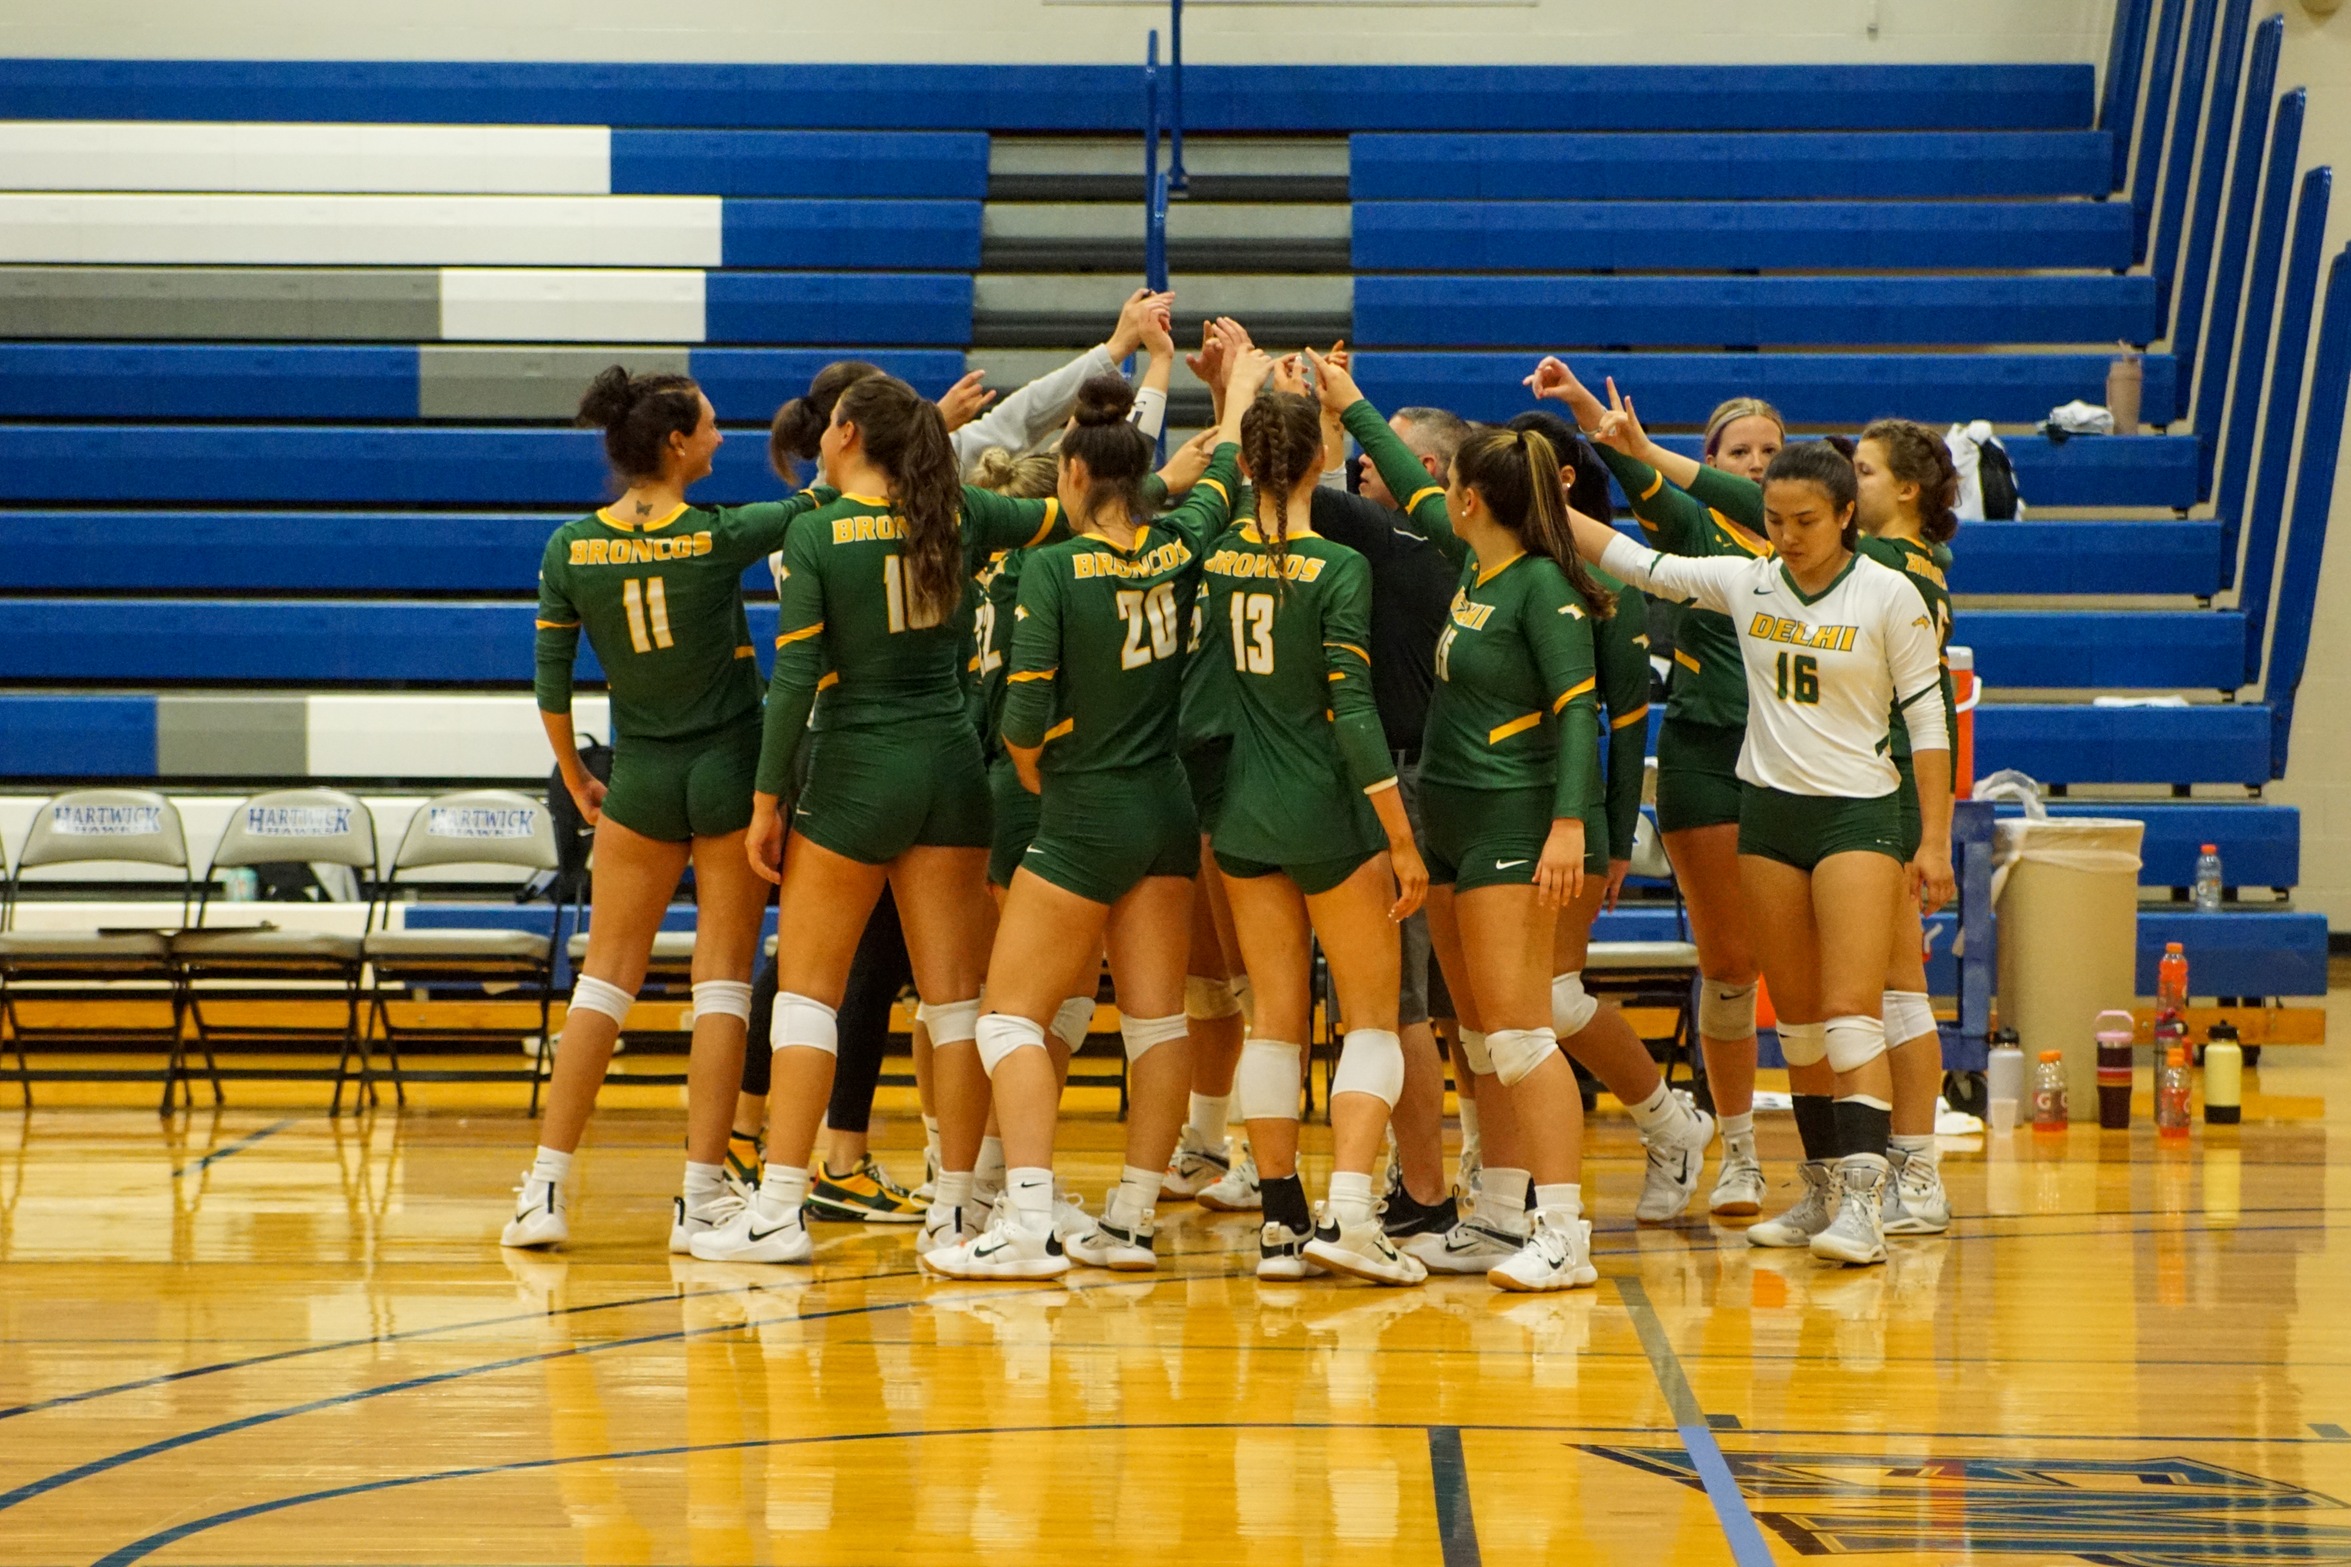 Women's Volleyball defeated in road match at Bard College